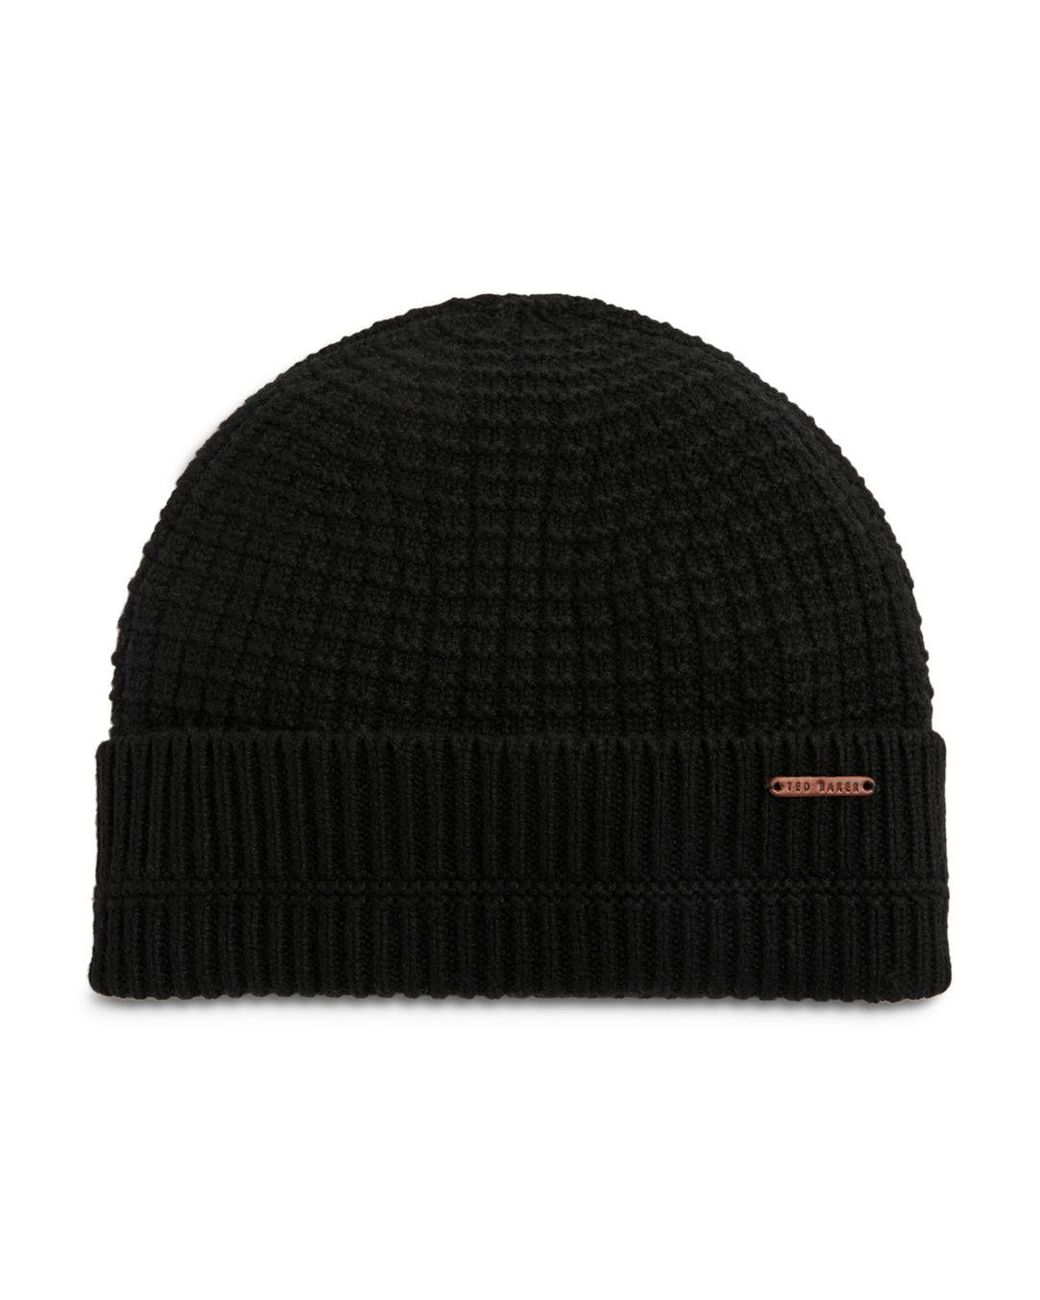 Ted Baker Leather Textured Beanie Hat in Black for Men - Lyst